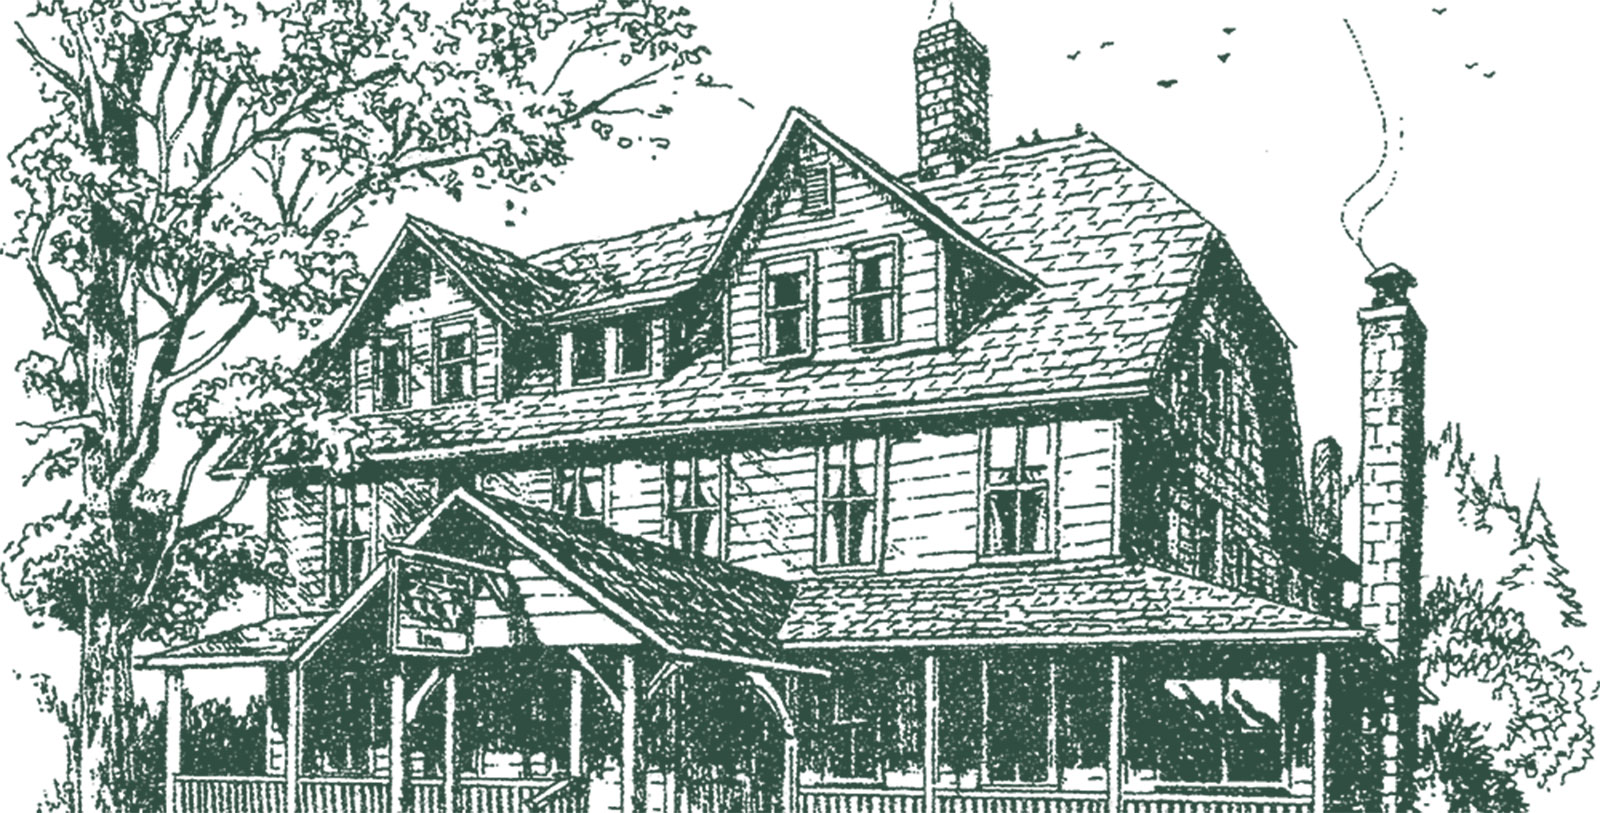 Discover the 16 historic accommodations inside the Eagles Mere Inn.